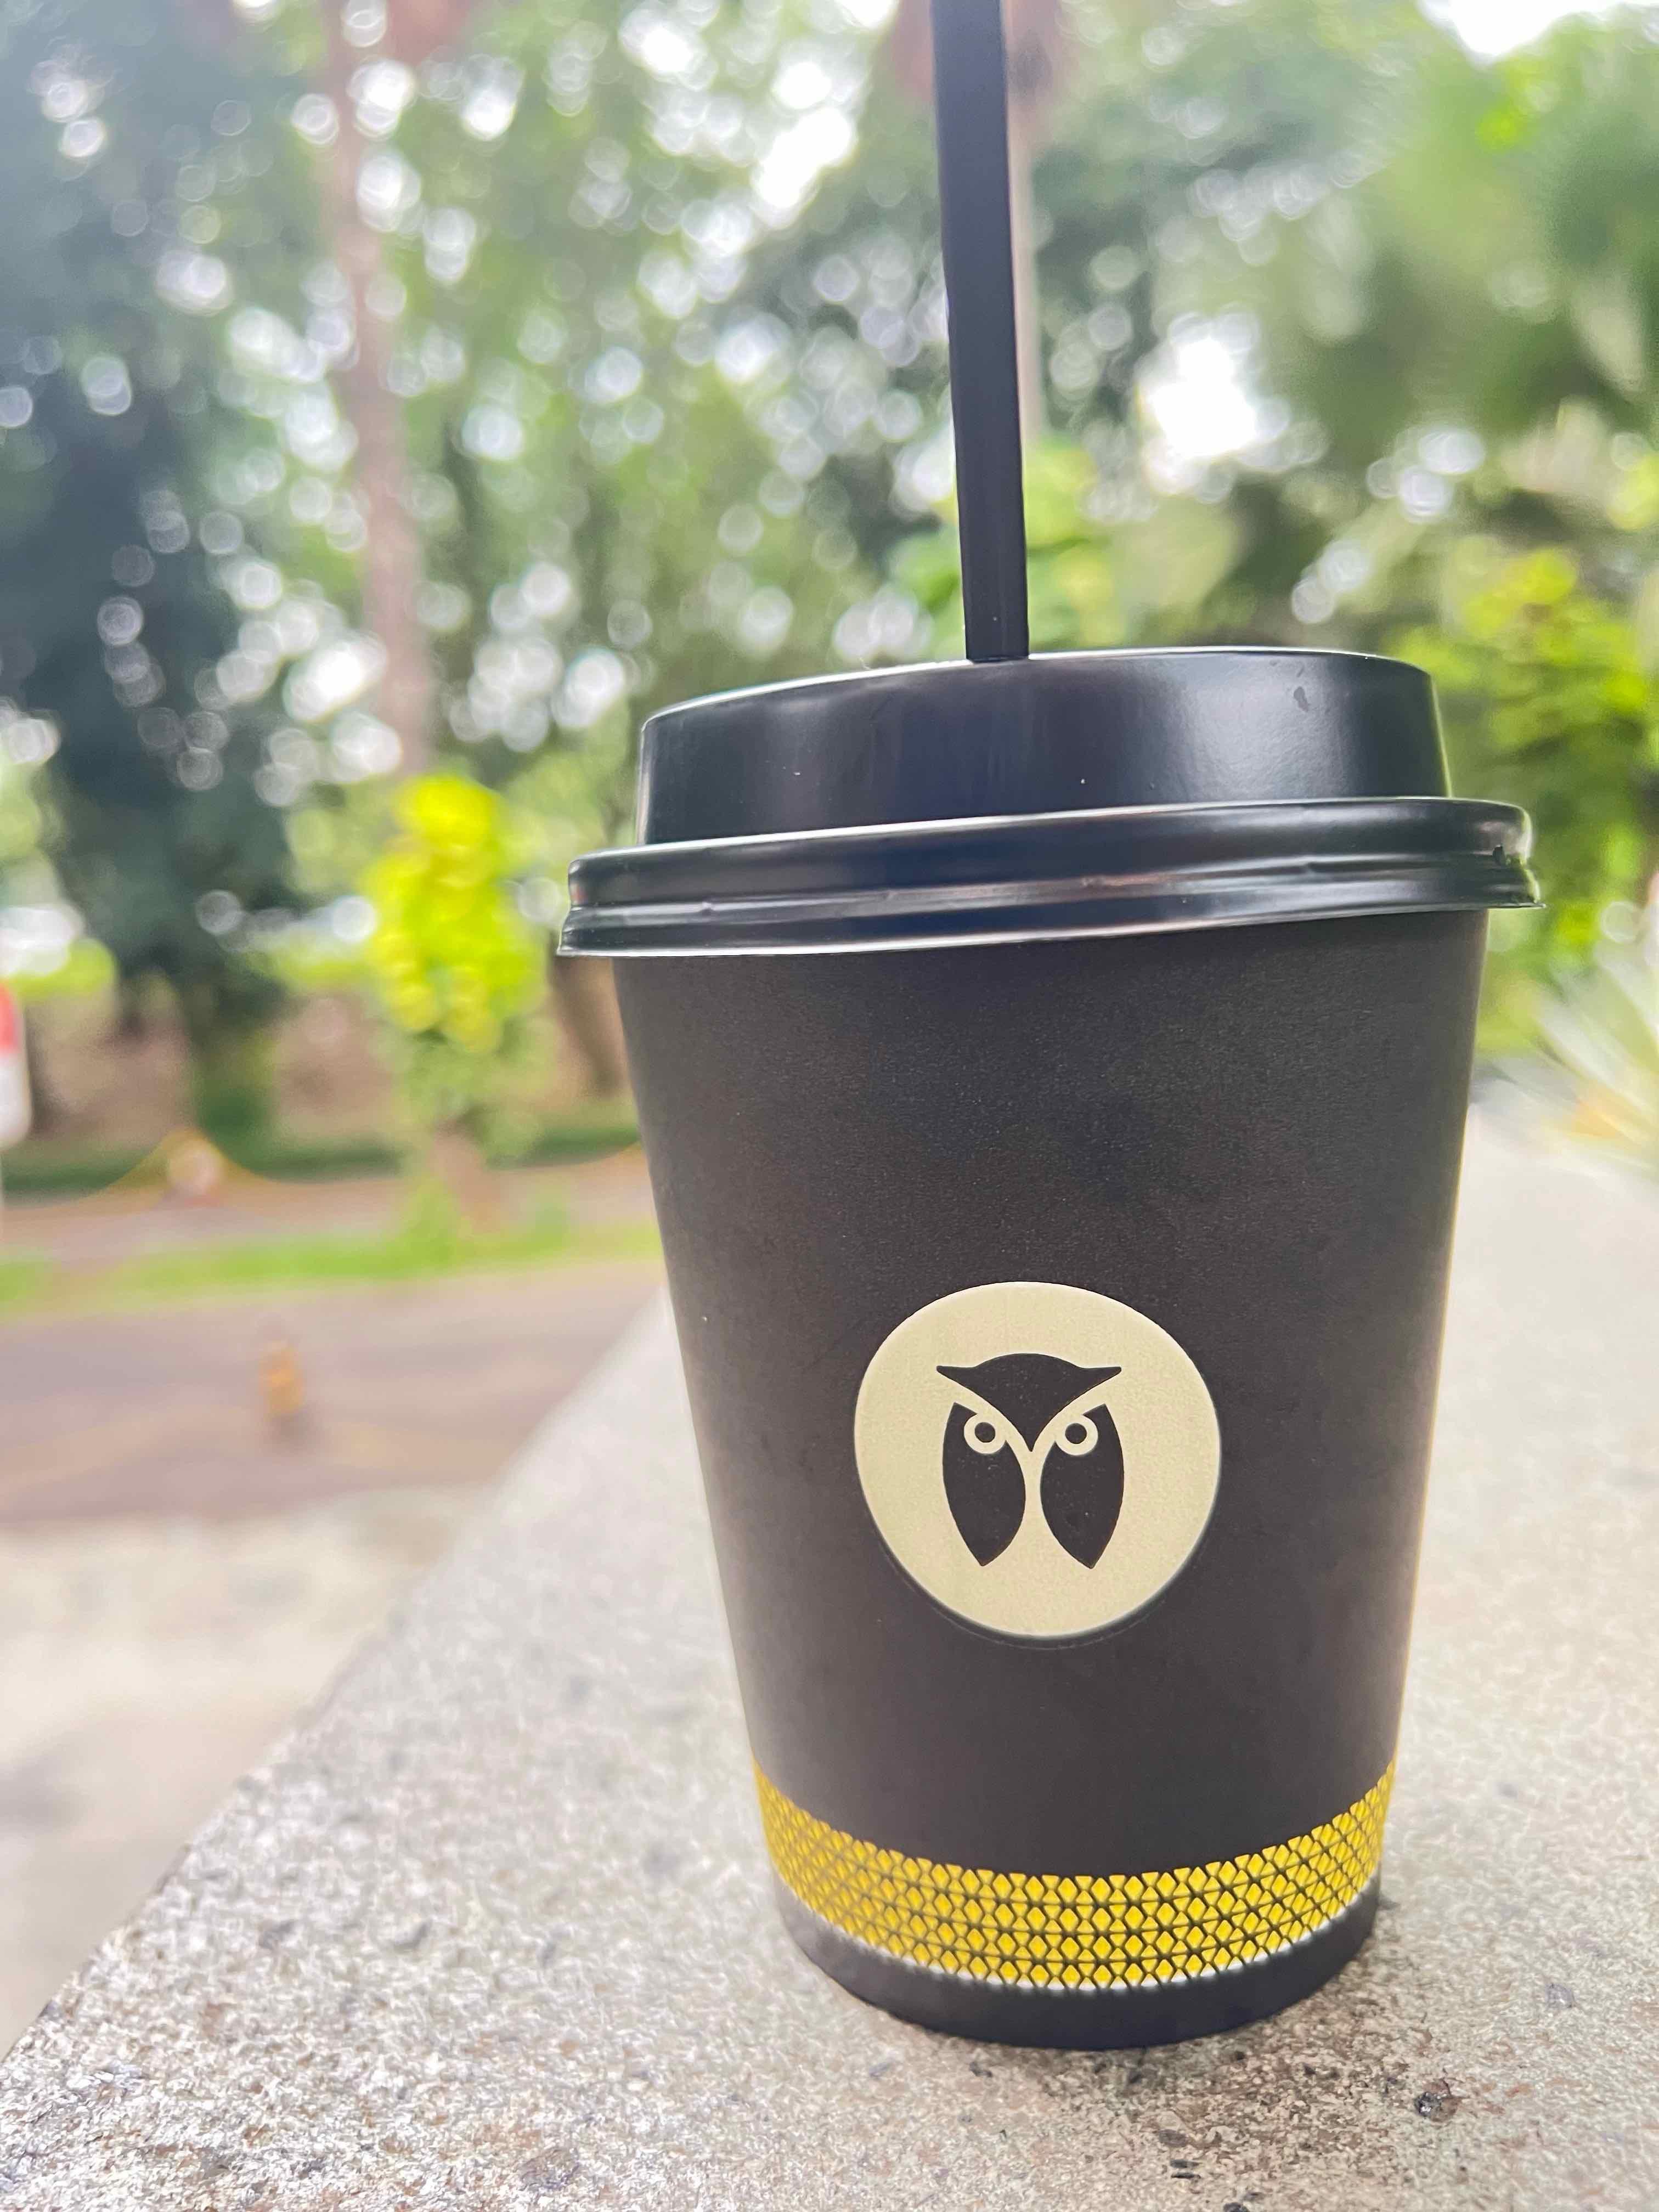 Maxx Coffee review